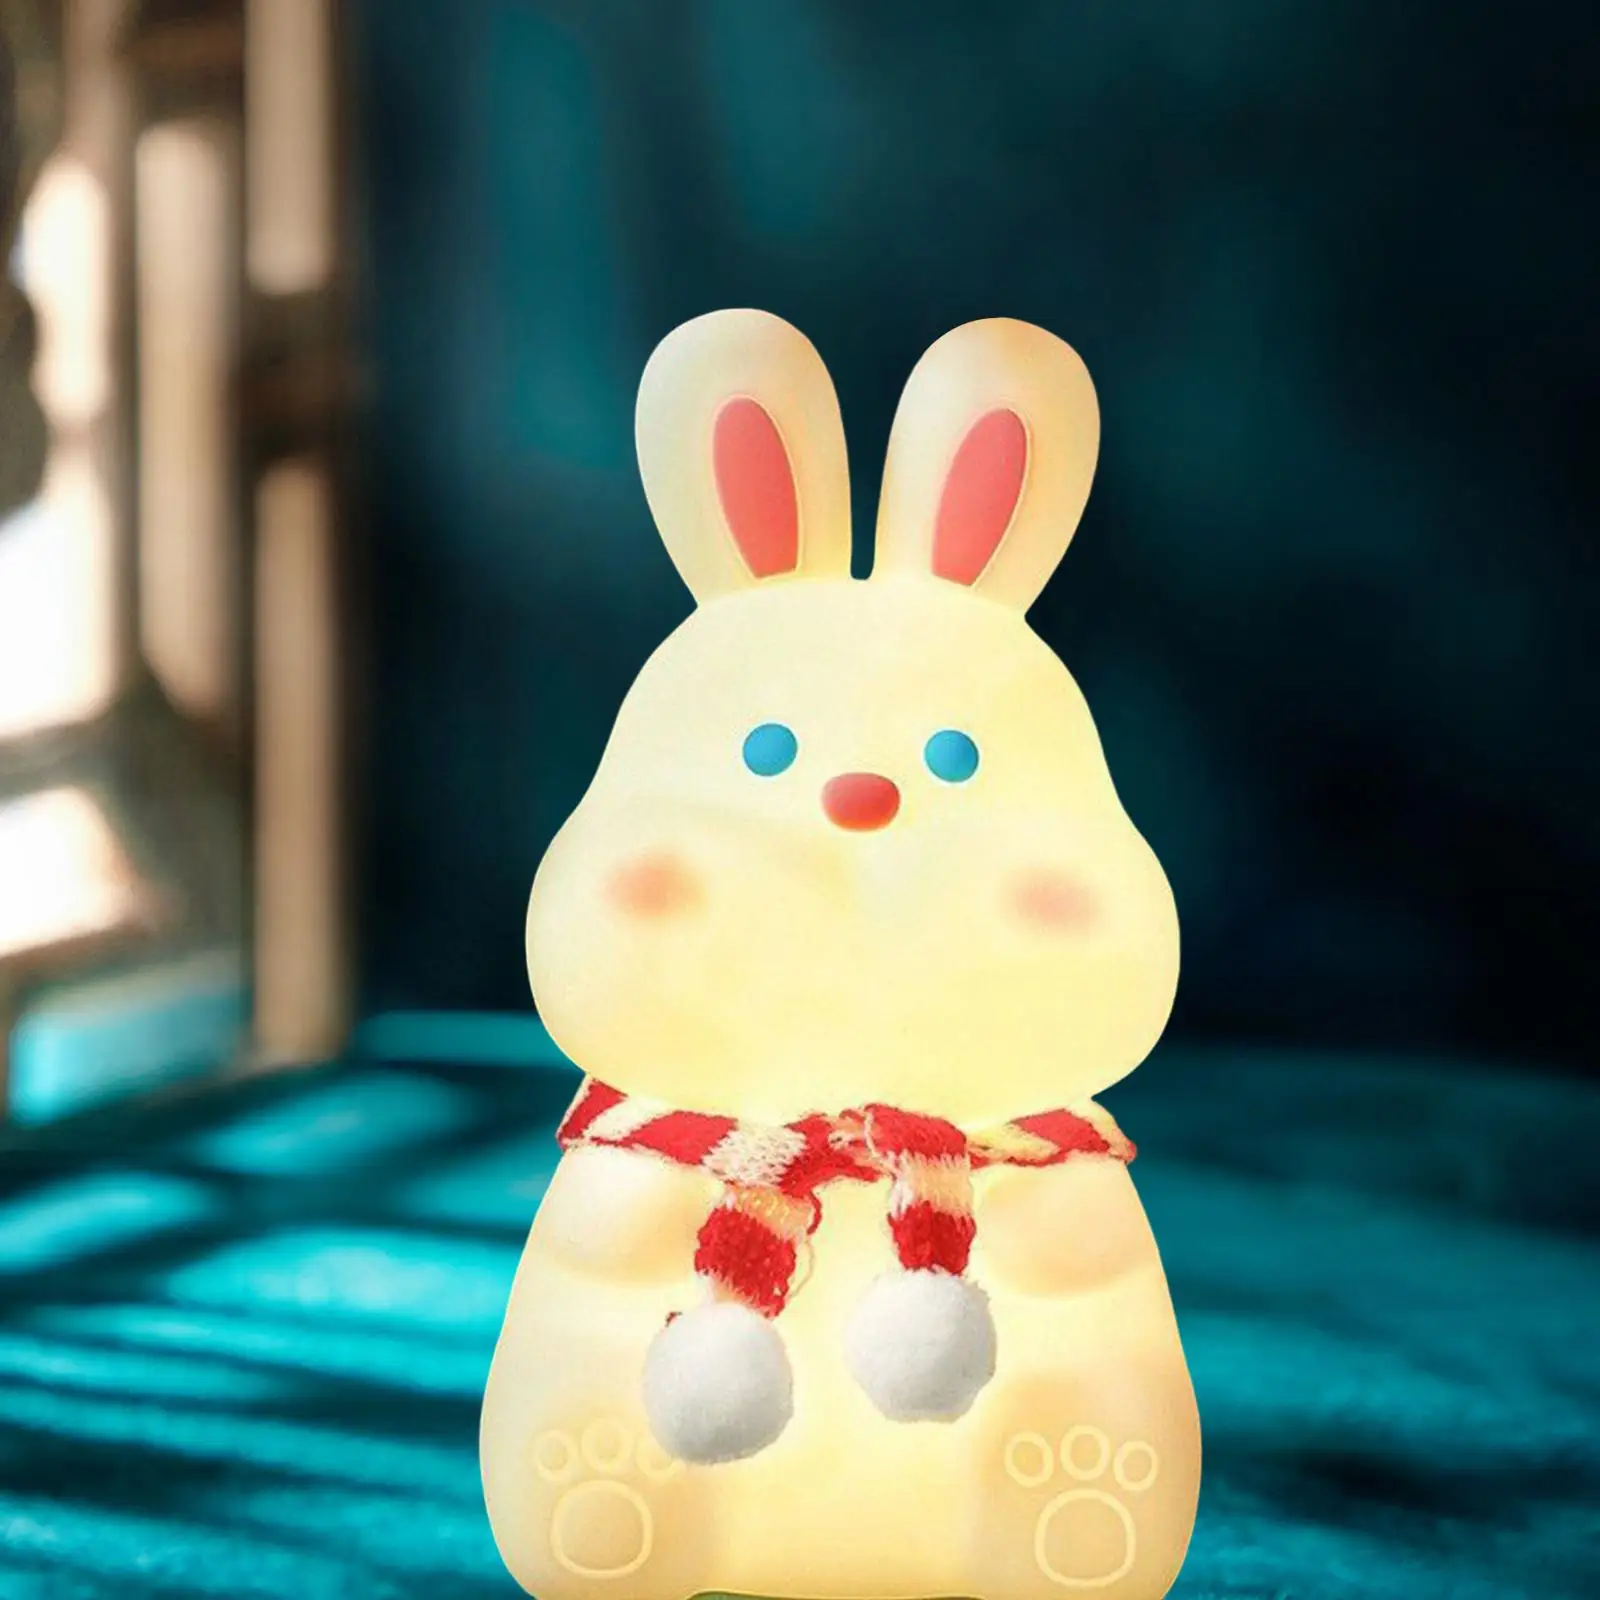 Rabbit Shaped Night Light Portable Color Changing Nightlight Cute Bedside Lamp for Tabletop Toddler Children Breastfeeding Baby